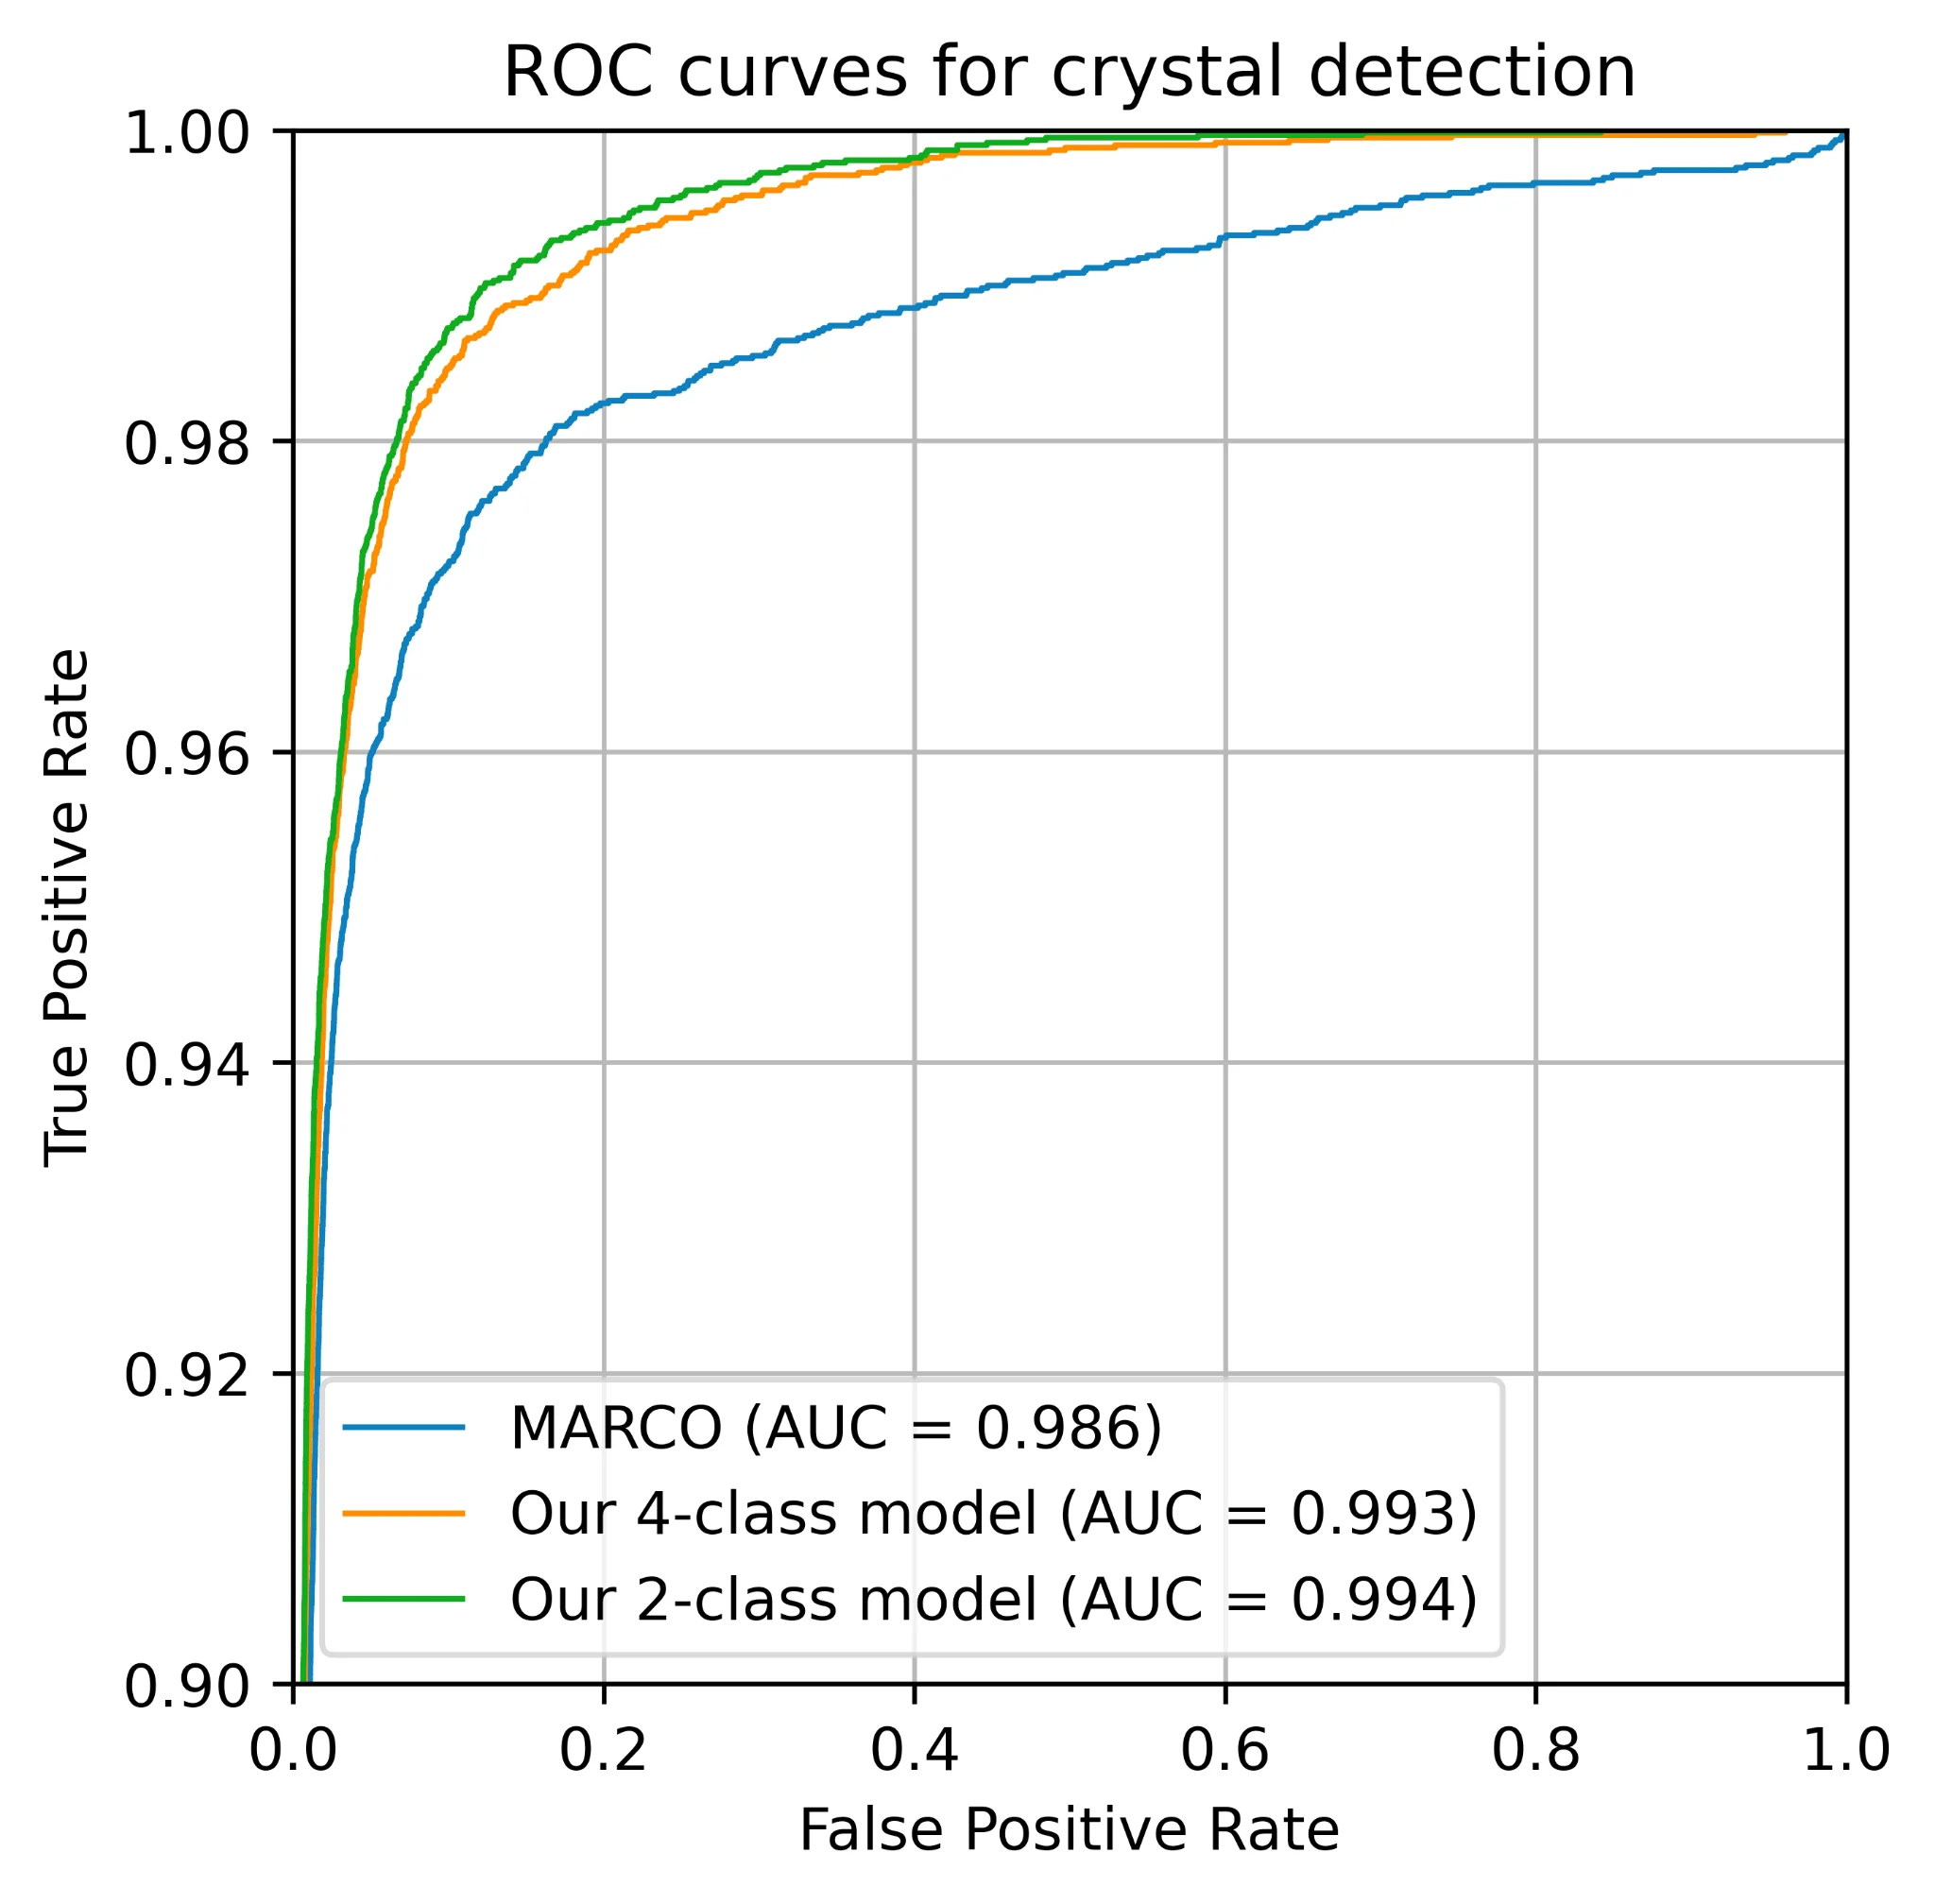 Line graph showing ROC curves for crystal detection with three models: MARCO, a 4-class model, and a 2-class model, with AUC scores of 0.986, 0.993, and 0.994 respectively. Each line curves towards the top left corner, indicating low false positive rates and high true positive rates for all models.